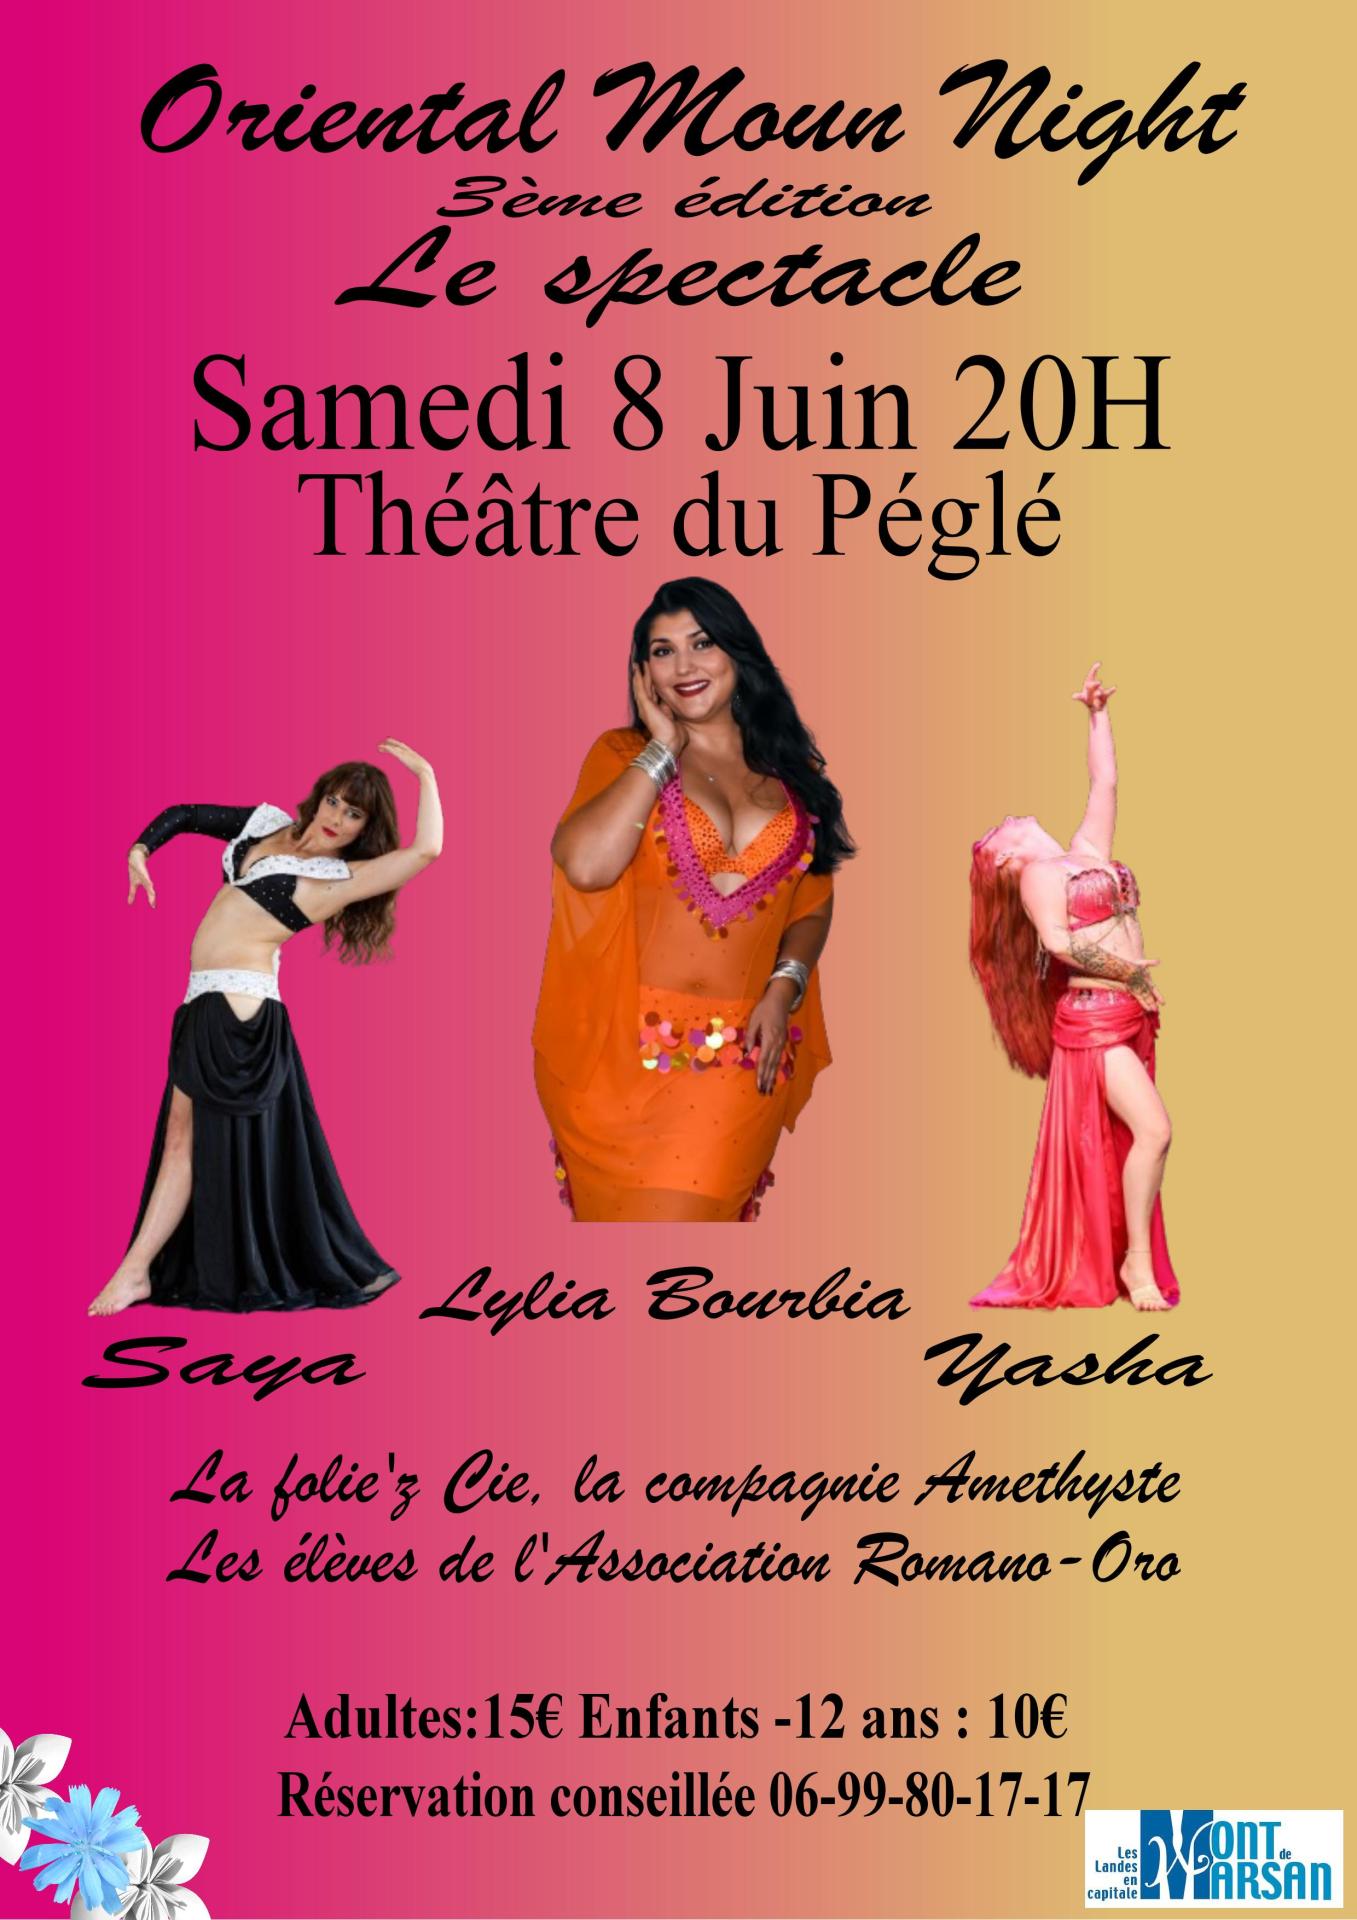 Omn3 le spectacle